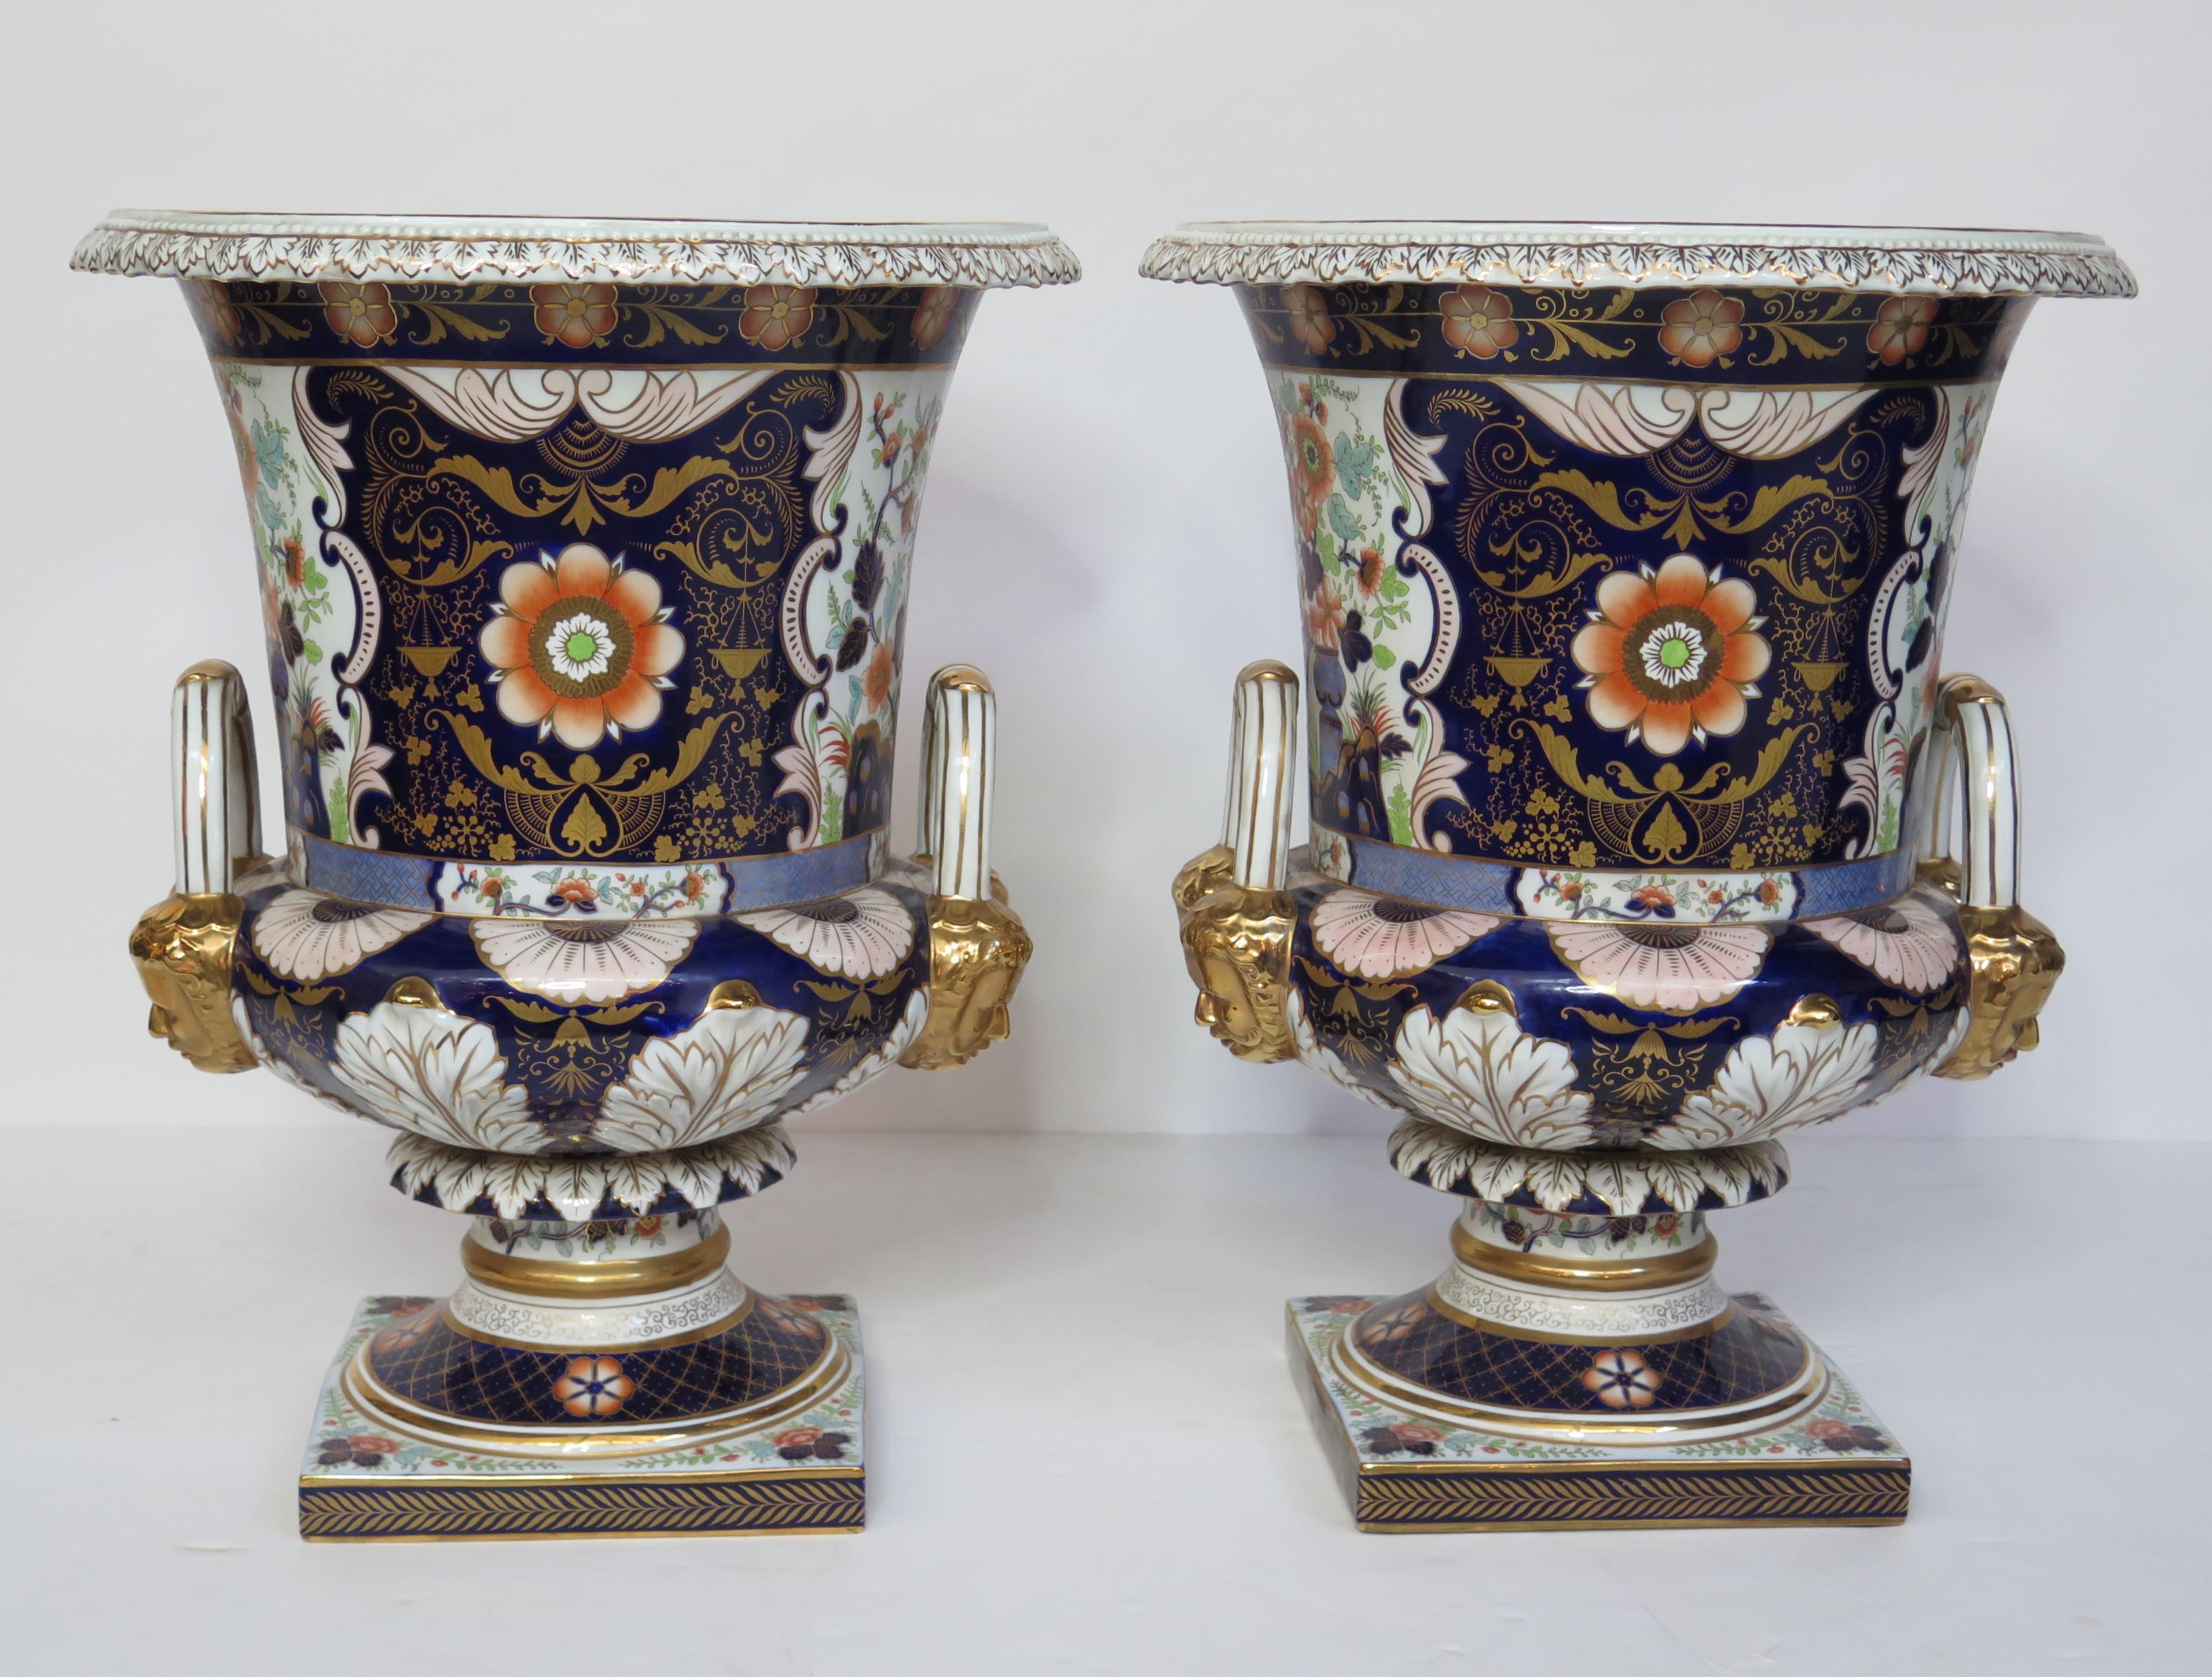 A gorgeous pair of large scale Royal Crown Derby style campana urns. At over two feet high, they're an impressive size with gorgeous designs hand painted onto every surface of the porcelain.
Incredibly detailed and intricate, particularly the gold